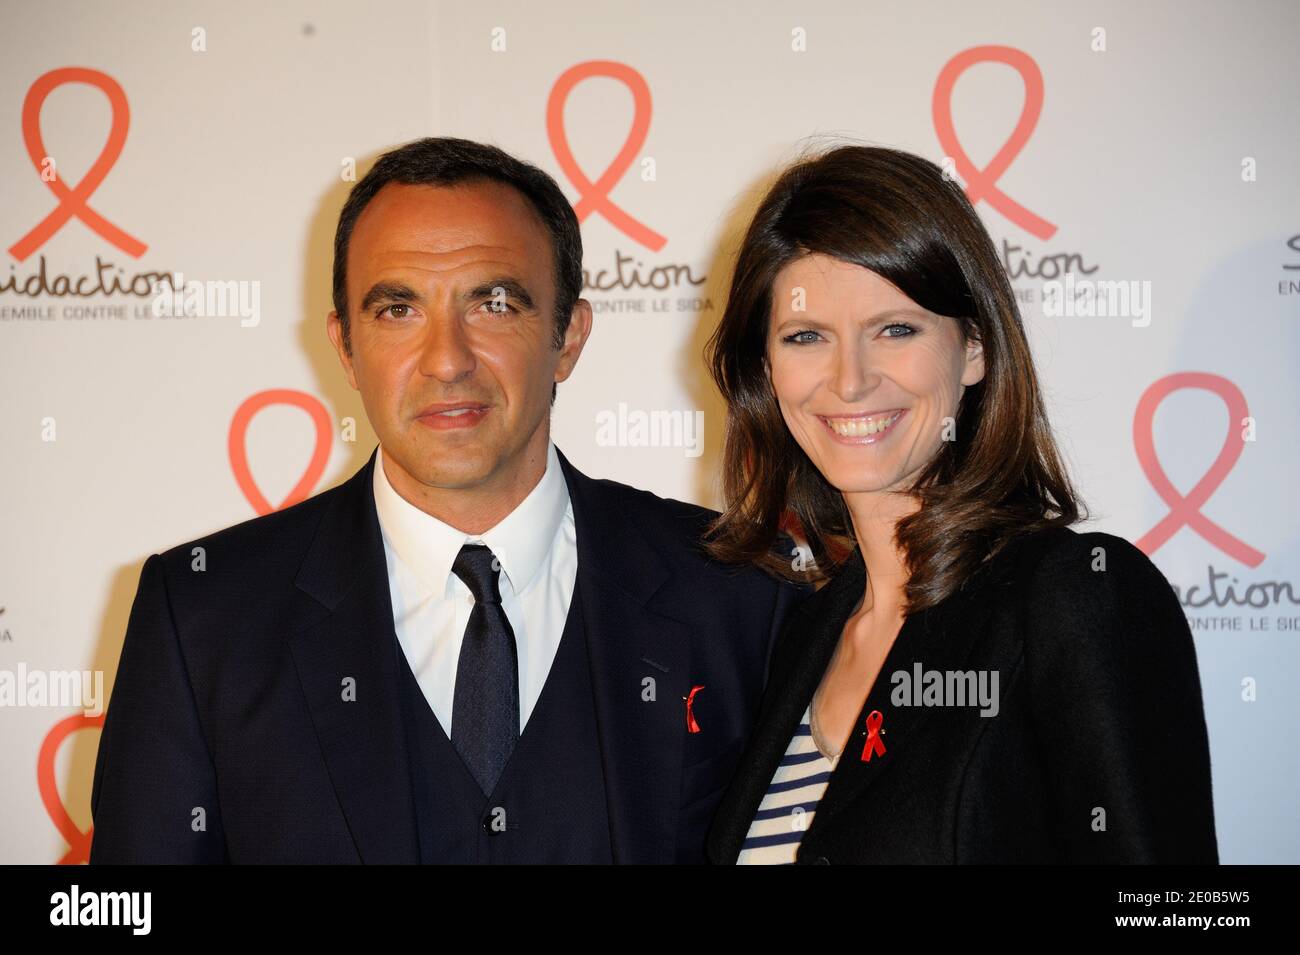 Nikos Aliagas and Magali Lunel posing at a photocall for the launch party of the 2012 Sidaction held at the Musee du quai Branly in Paris, France on March 12, 2012. Photo by Alban Wyters/ABACAPRESS.COM Stock Photo